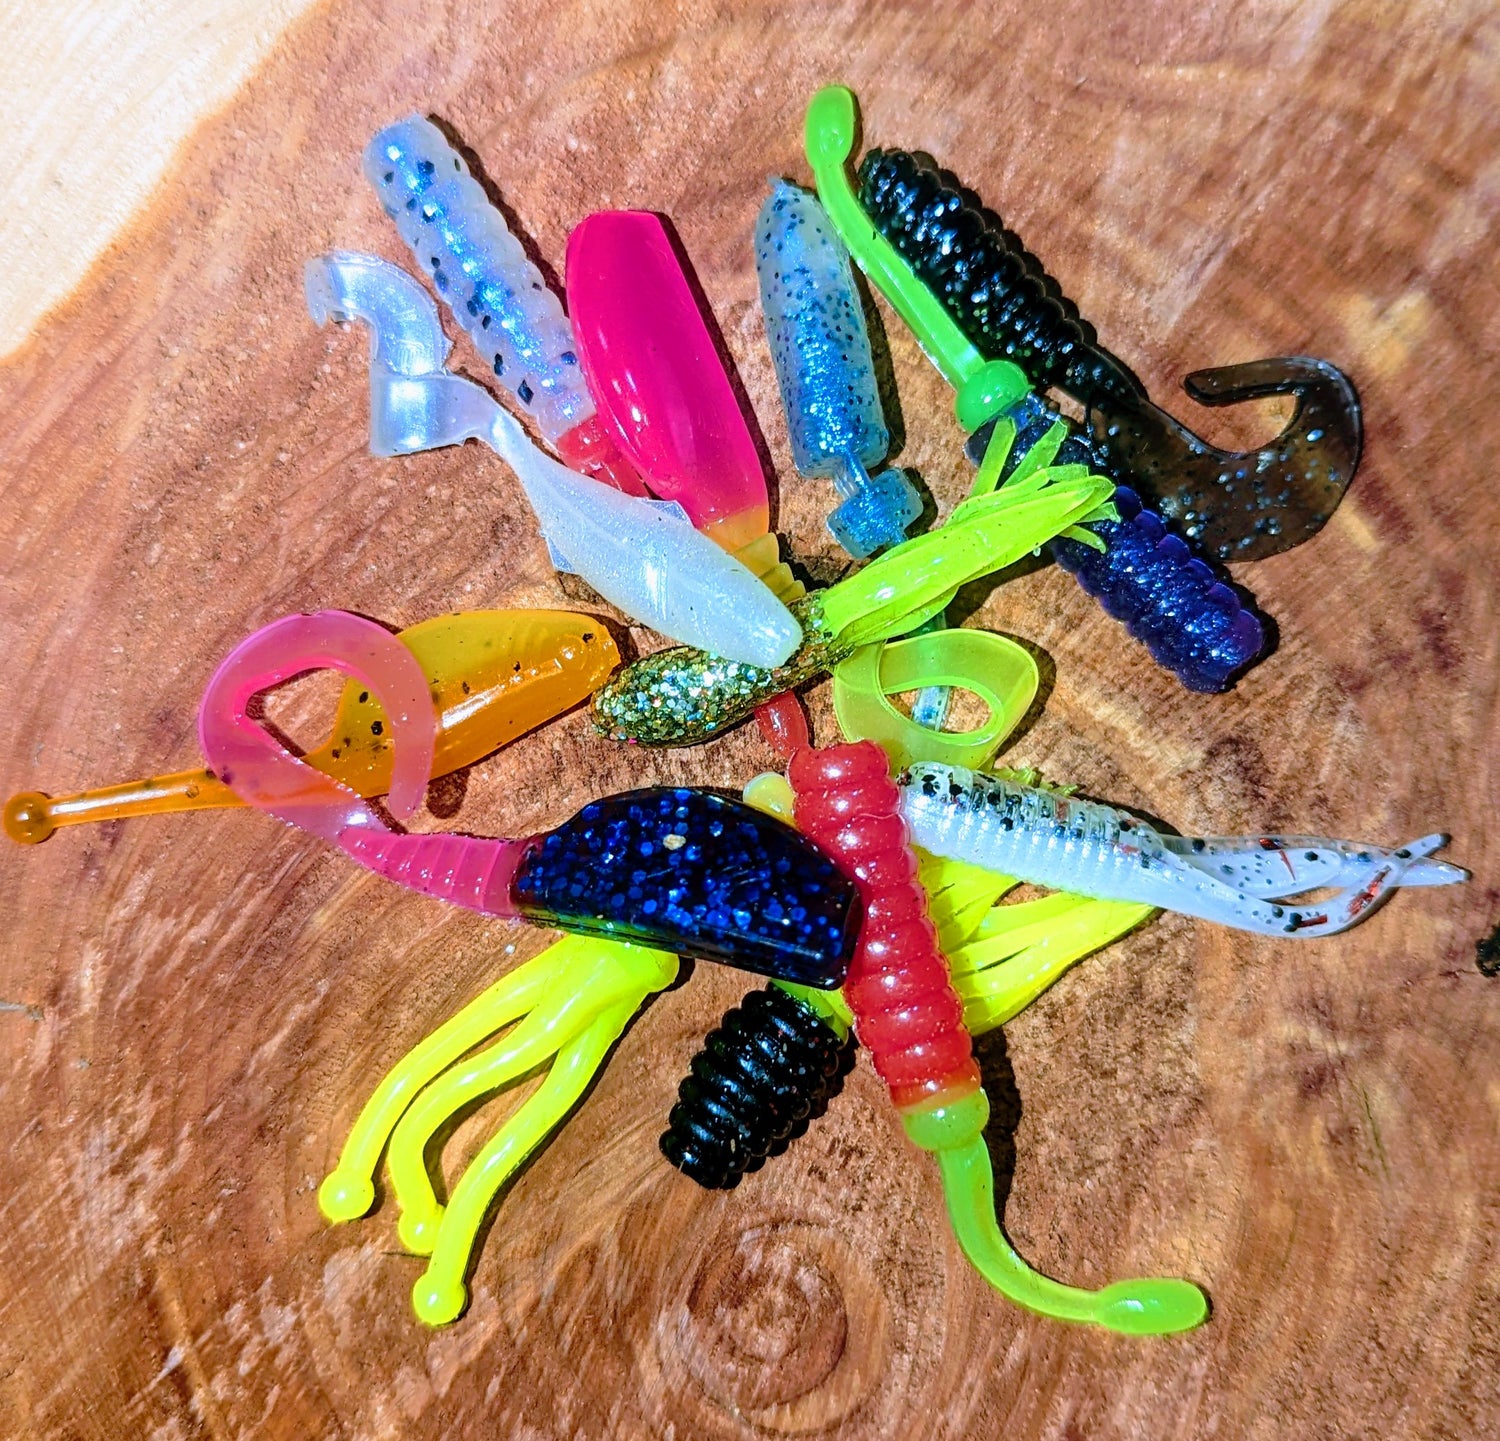 Custom crappie gear from Hair Jigs, Jig Heads, Plastic Baits and Rods. –  American Crappie Gear